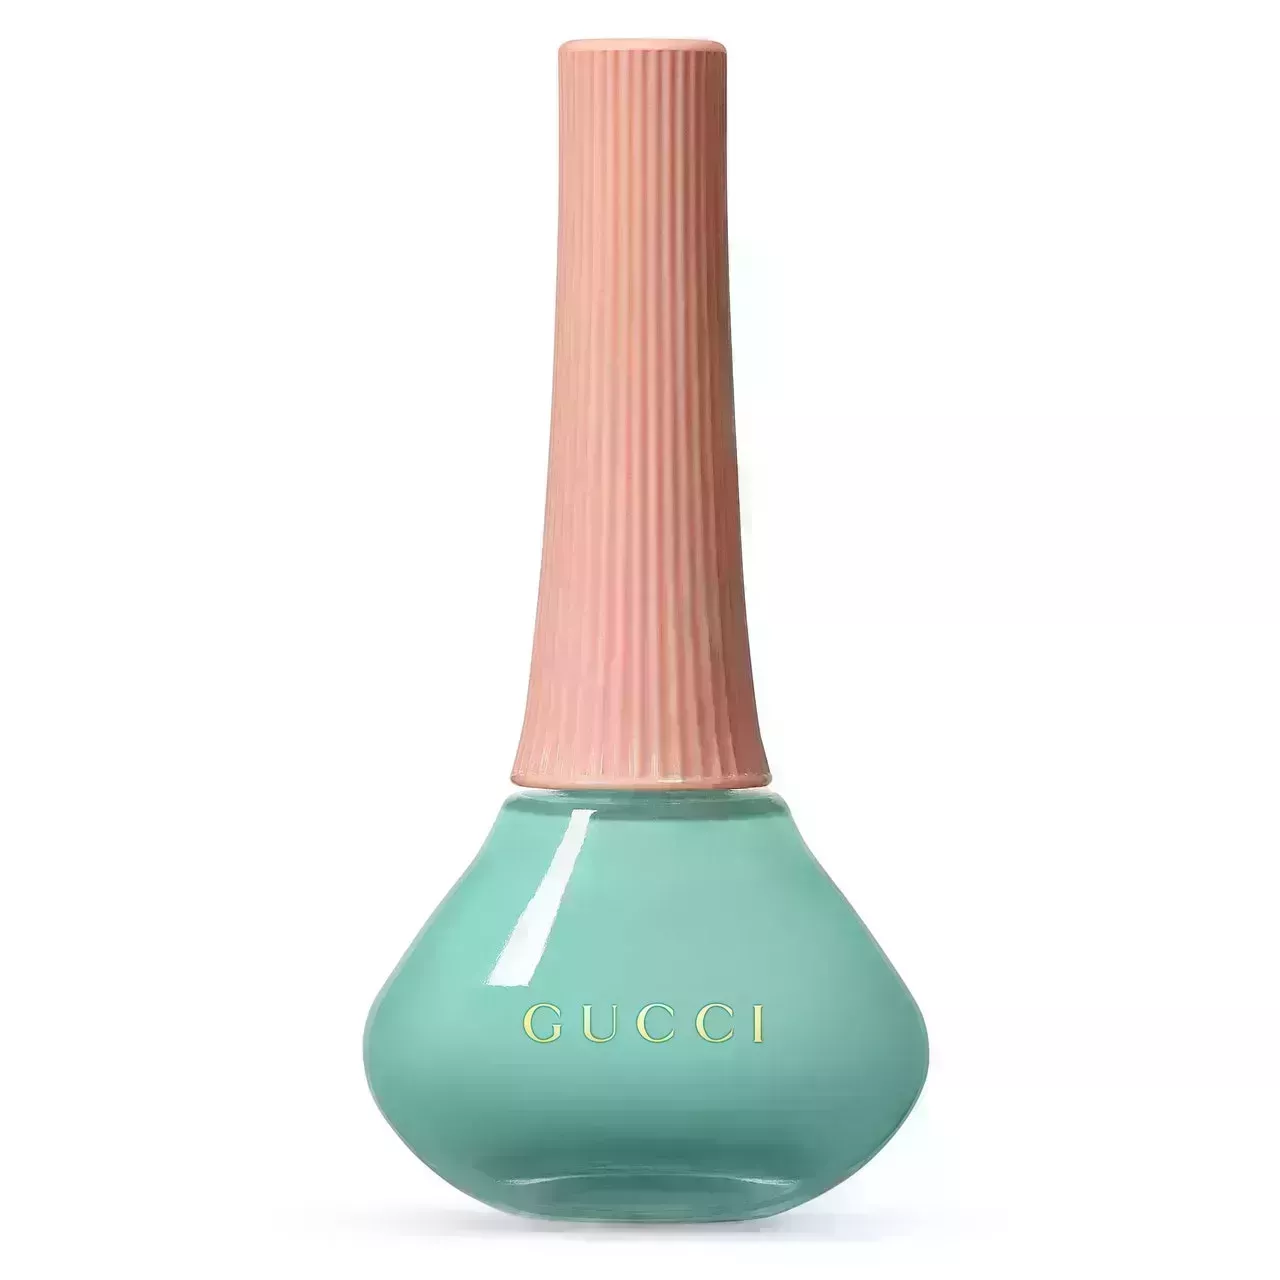 Gucci Vernis à Ongles Nail Polish in 713 Dorothy Turquoise